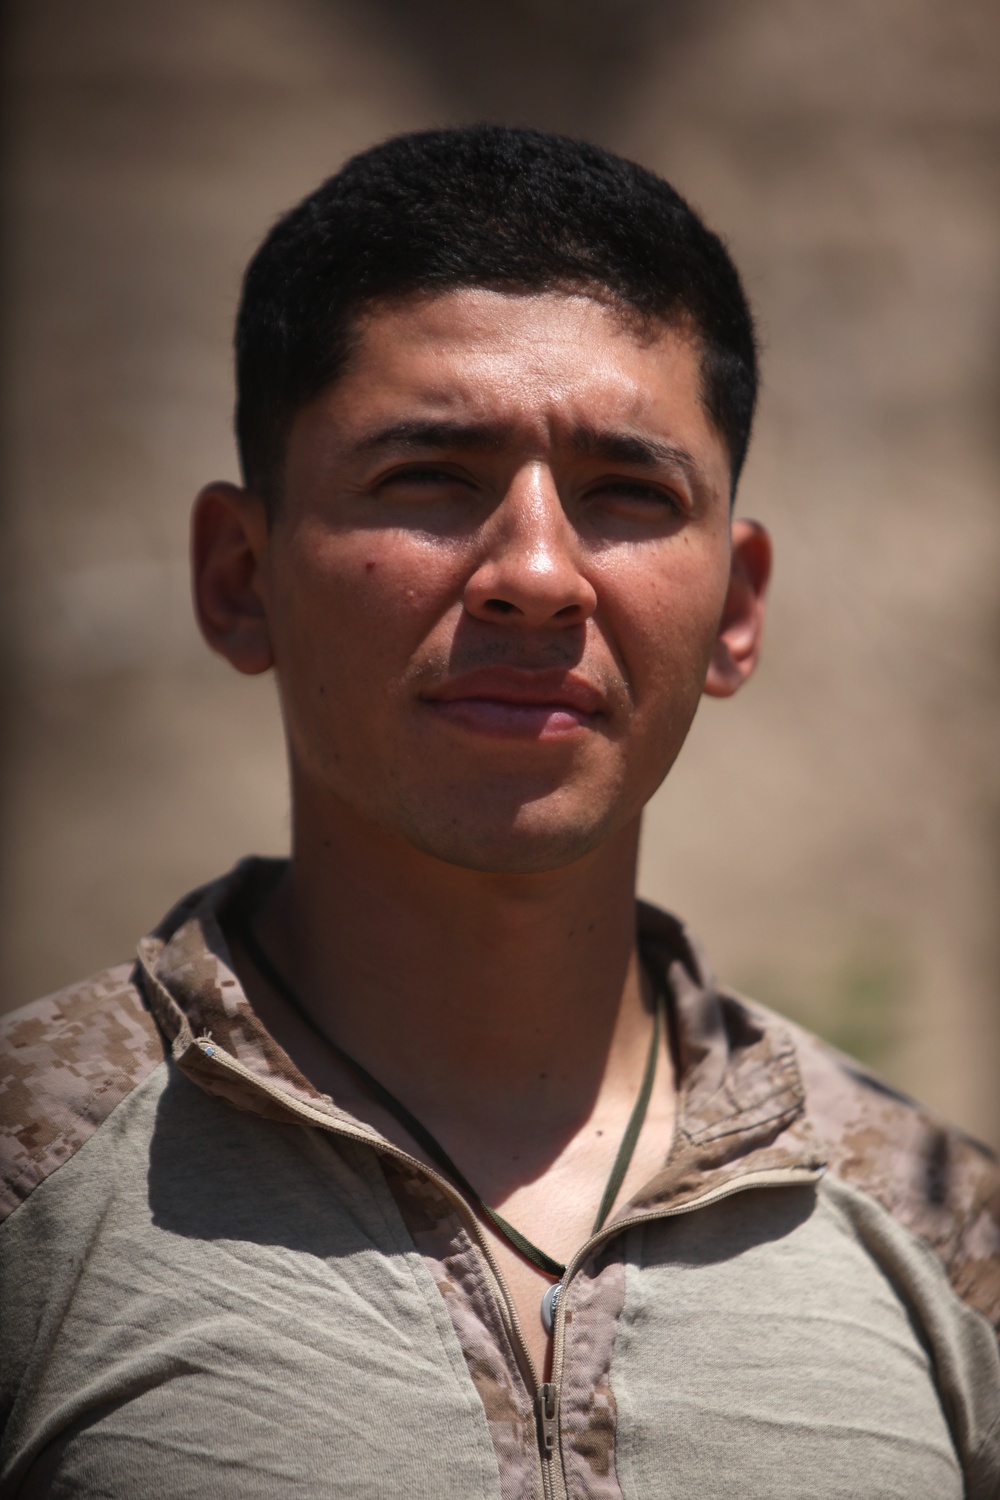 Corpsmen rescue wounded Marine during firefight